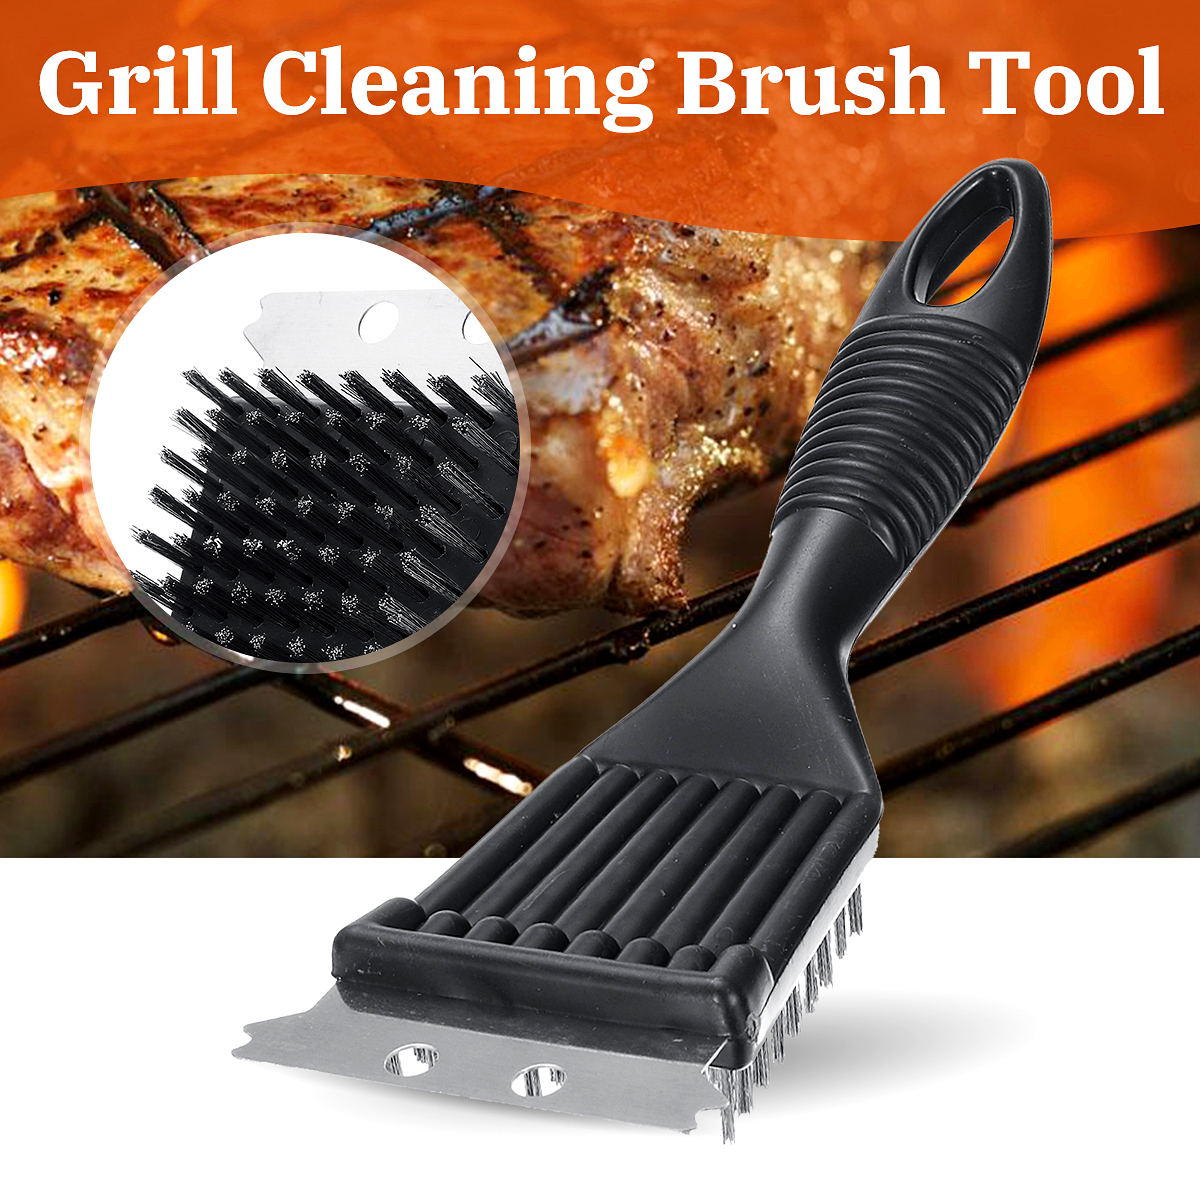 Barbecue-Brushes-Wire-Bristles-Cleaning-Handle-Cooking-Steel-Grill-Brush-BBQ-Non-stick-Outdoor-Home--1654749-1